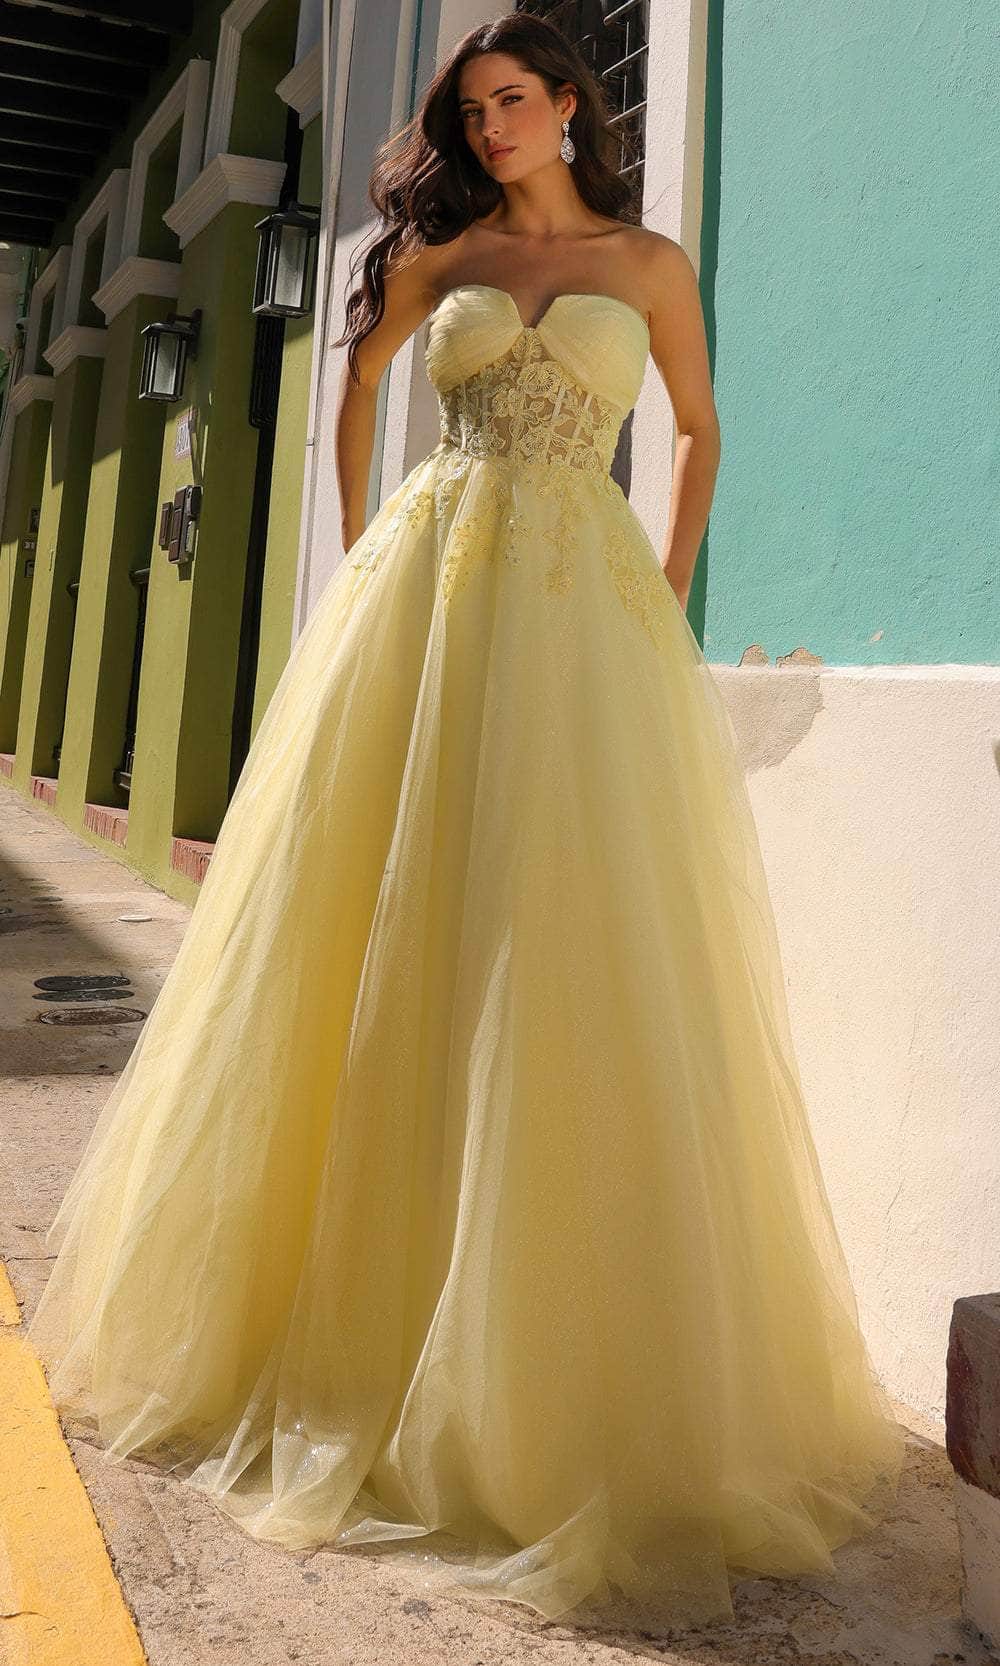 Nox Anabel T1326 - Sweetheart Appliqued Prom Dress Special Occasion Dresses 